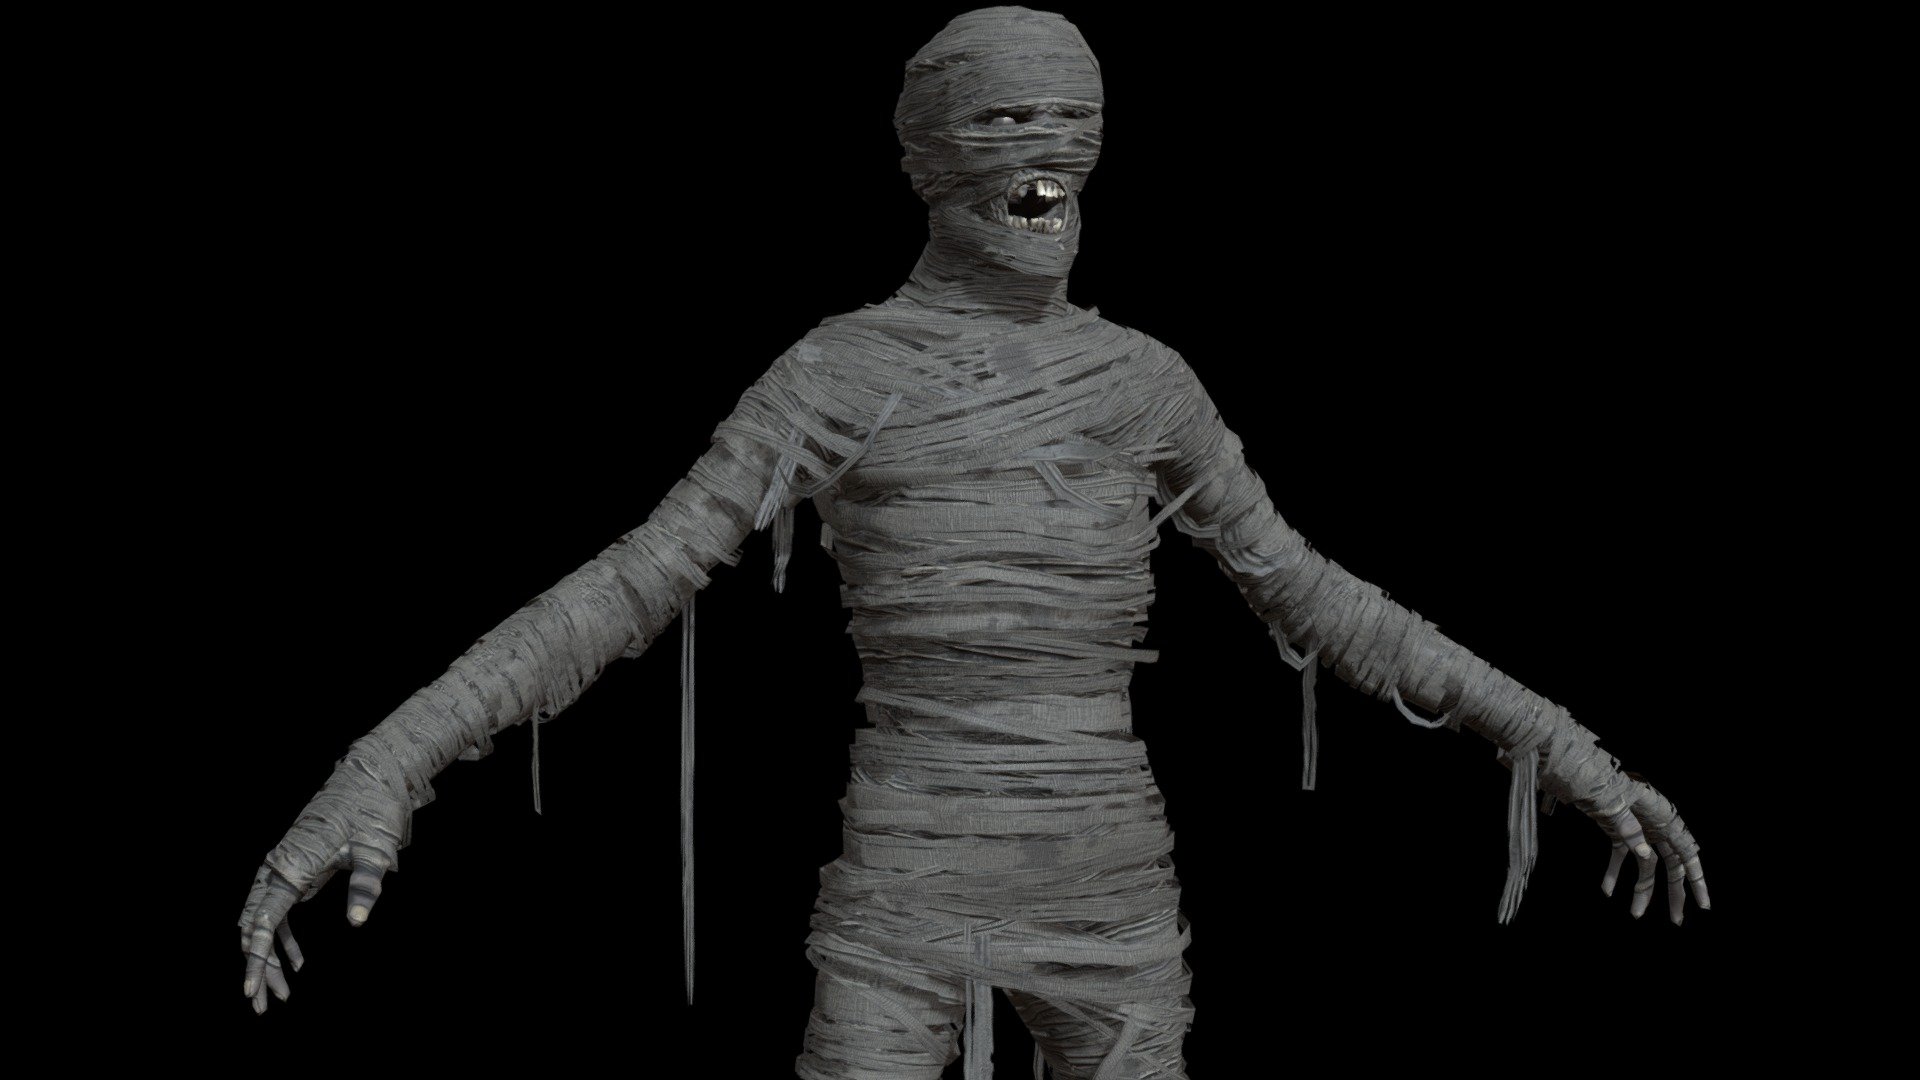 Low-poly model of the character Mummy
Suitable for games of different genre: RPG, strategy, first-person shooter, etc.
In the archive, the basic mesh (fbx and maya)

two uv set 4096x4096 
three skins
textures 27
materials 9

In the model it is desirable to use a shader with a two-sided display of polygons.

Support me on patreon, and get access to unique content and other cool events patreon.com/dremorn

And also subscribe to my insta, there are a lot of pictures and other cool things 
instagram.com/andrey.panchenko/ - Mummy - Buy Royalty Free 3D model by dremorn 3d model